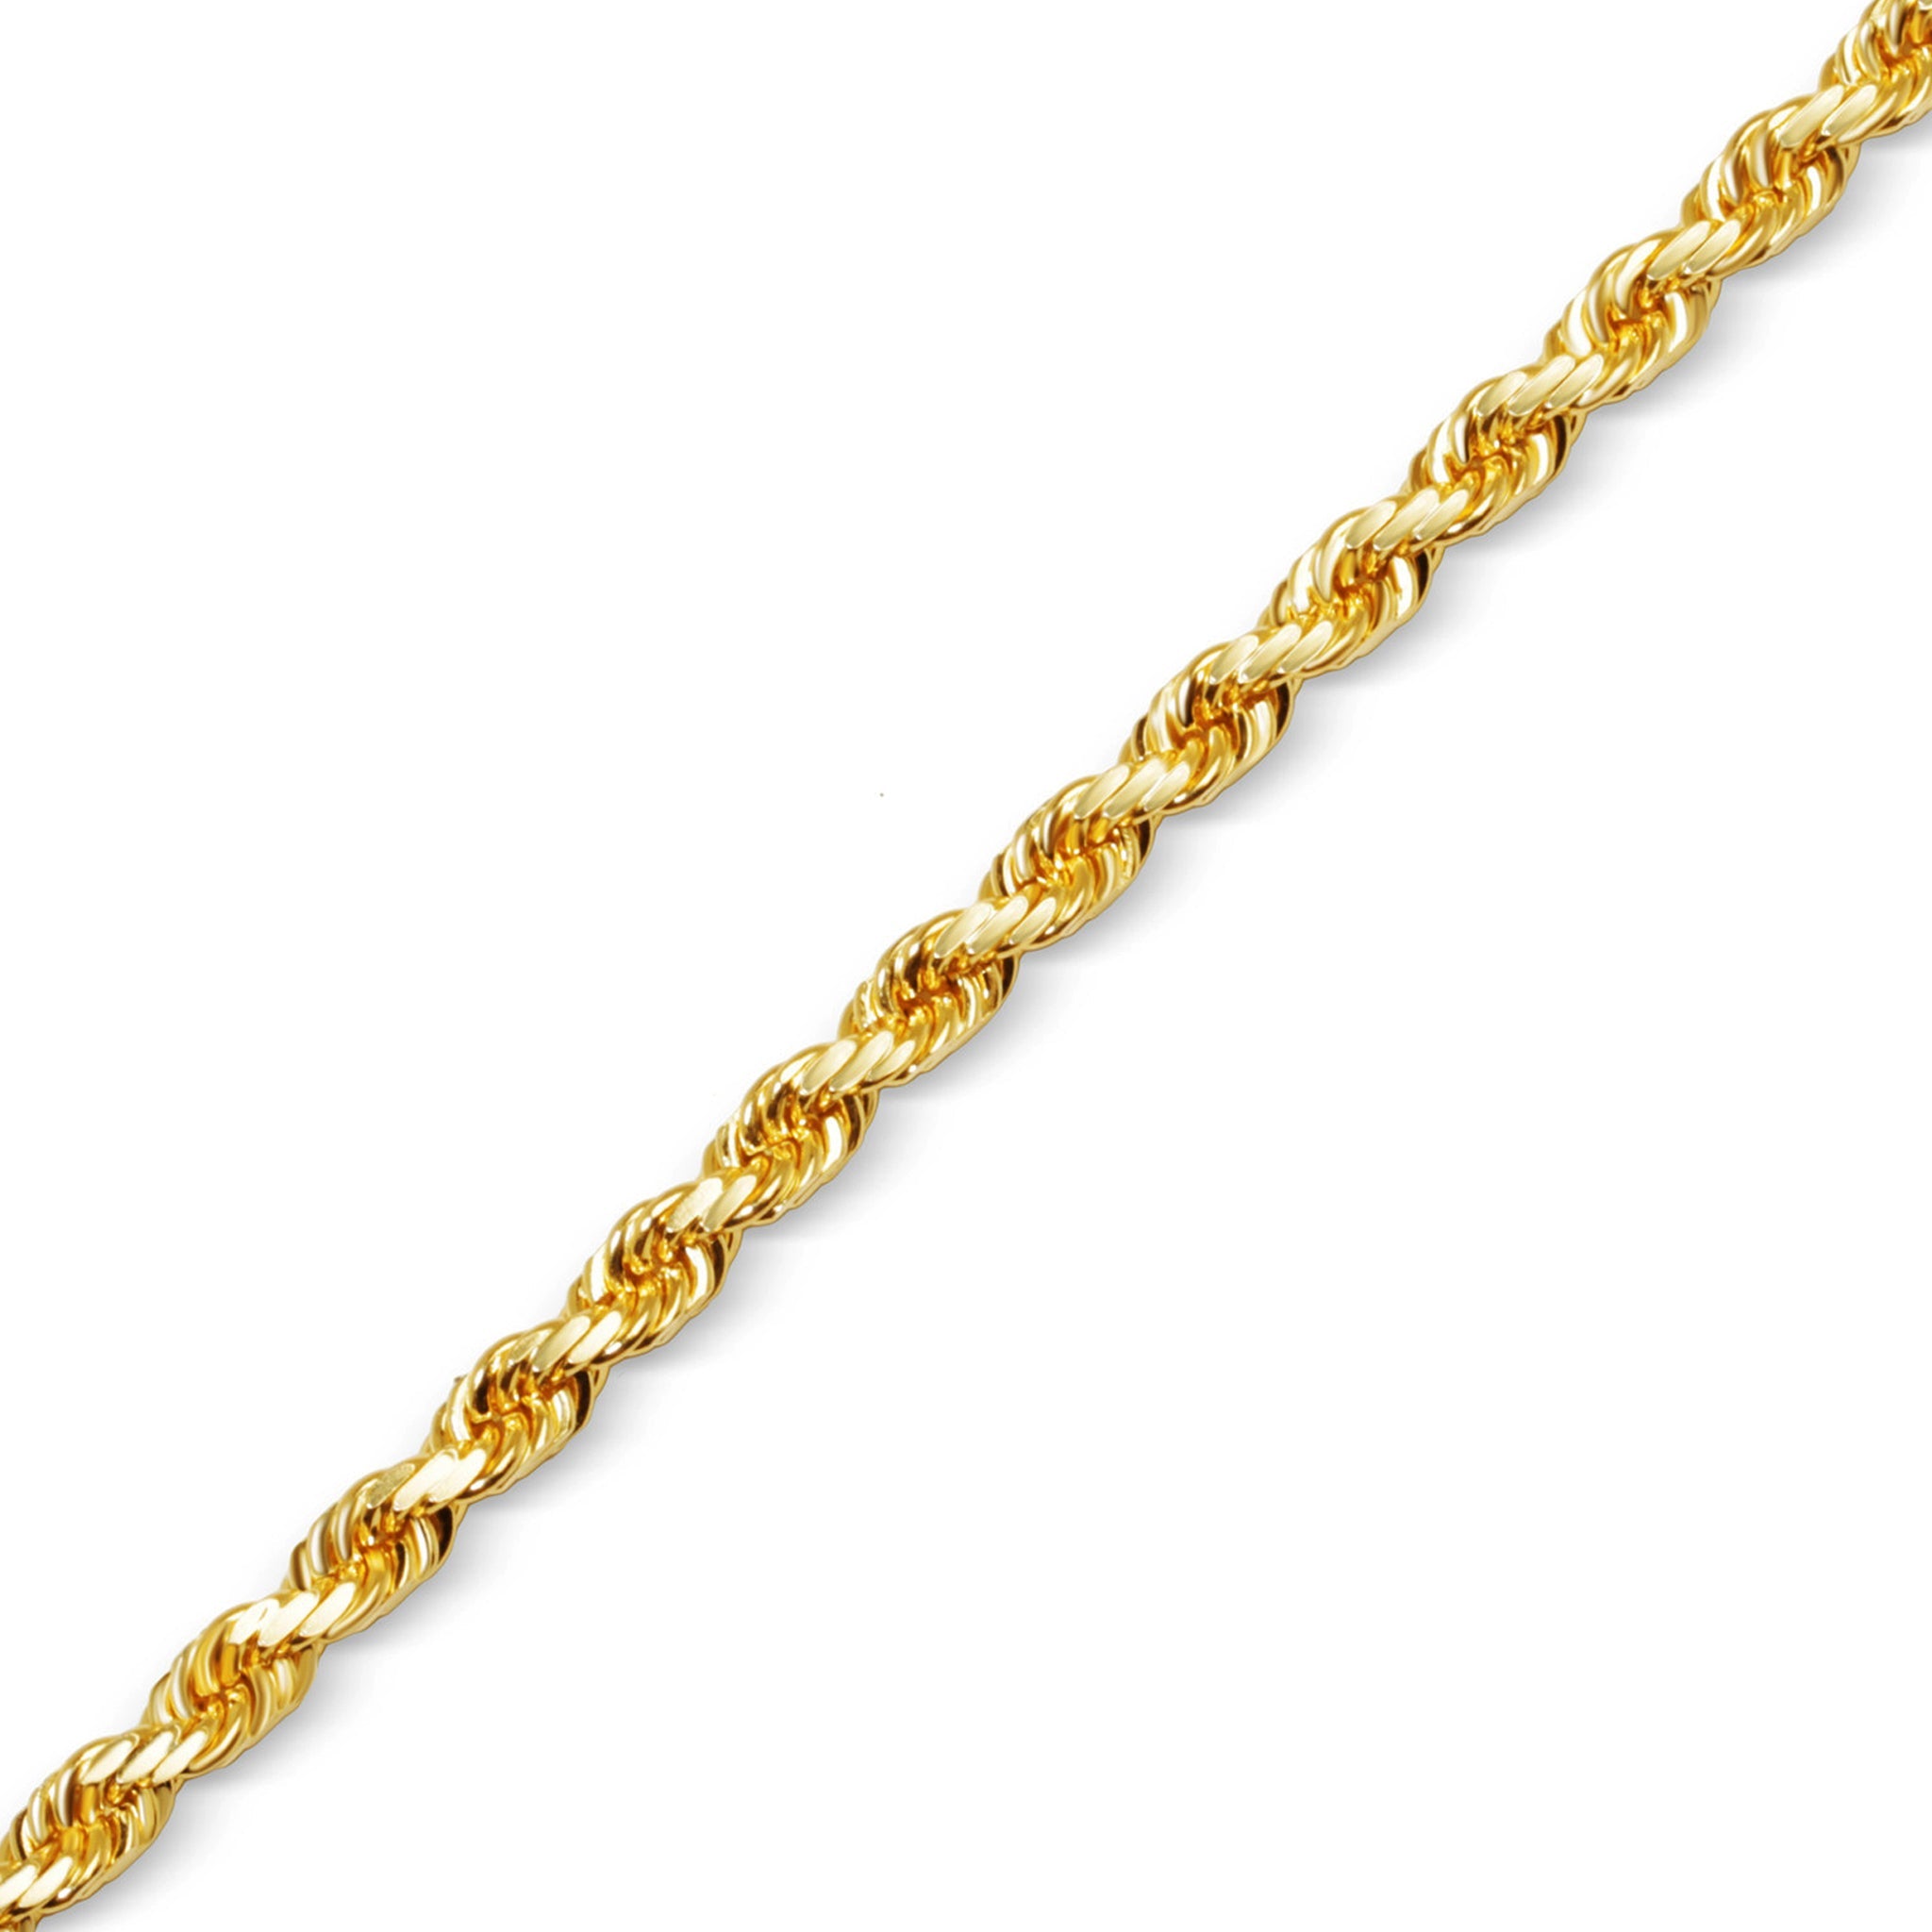 Gold Rope Chain (4mm) - IF & Co.